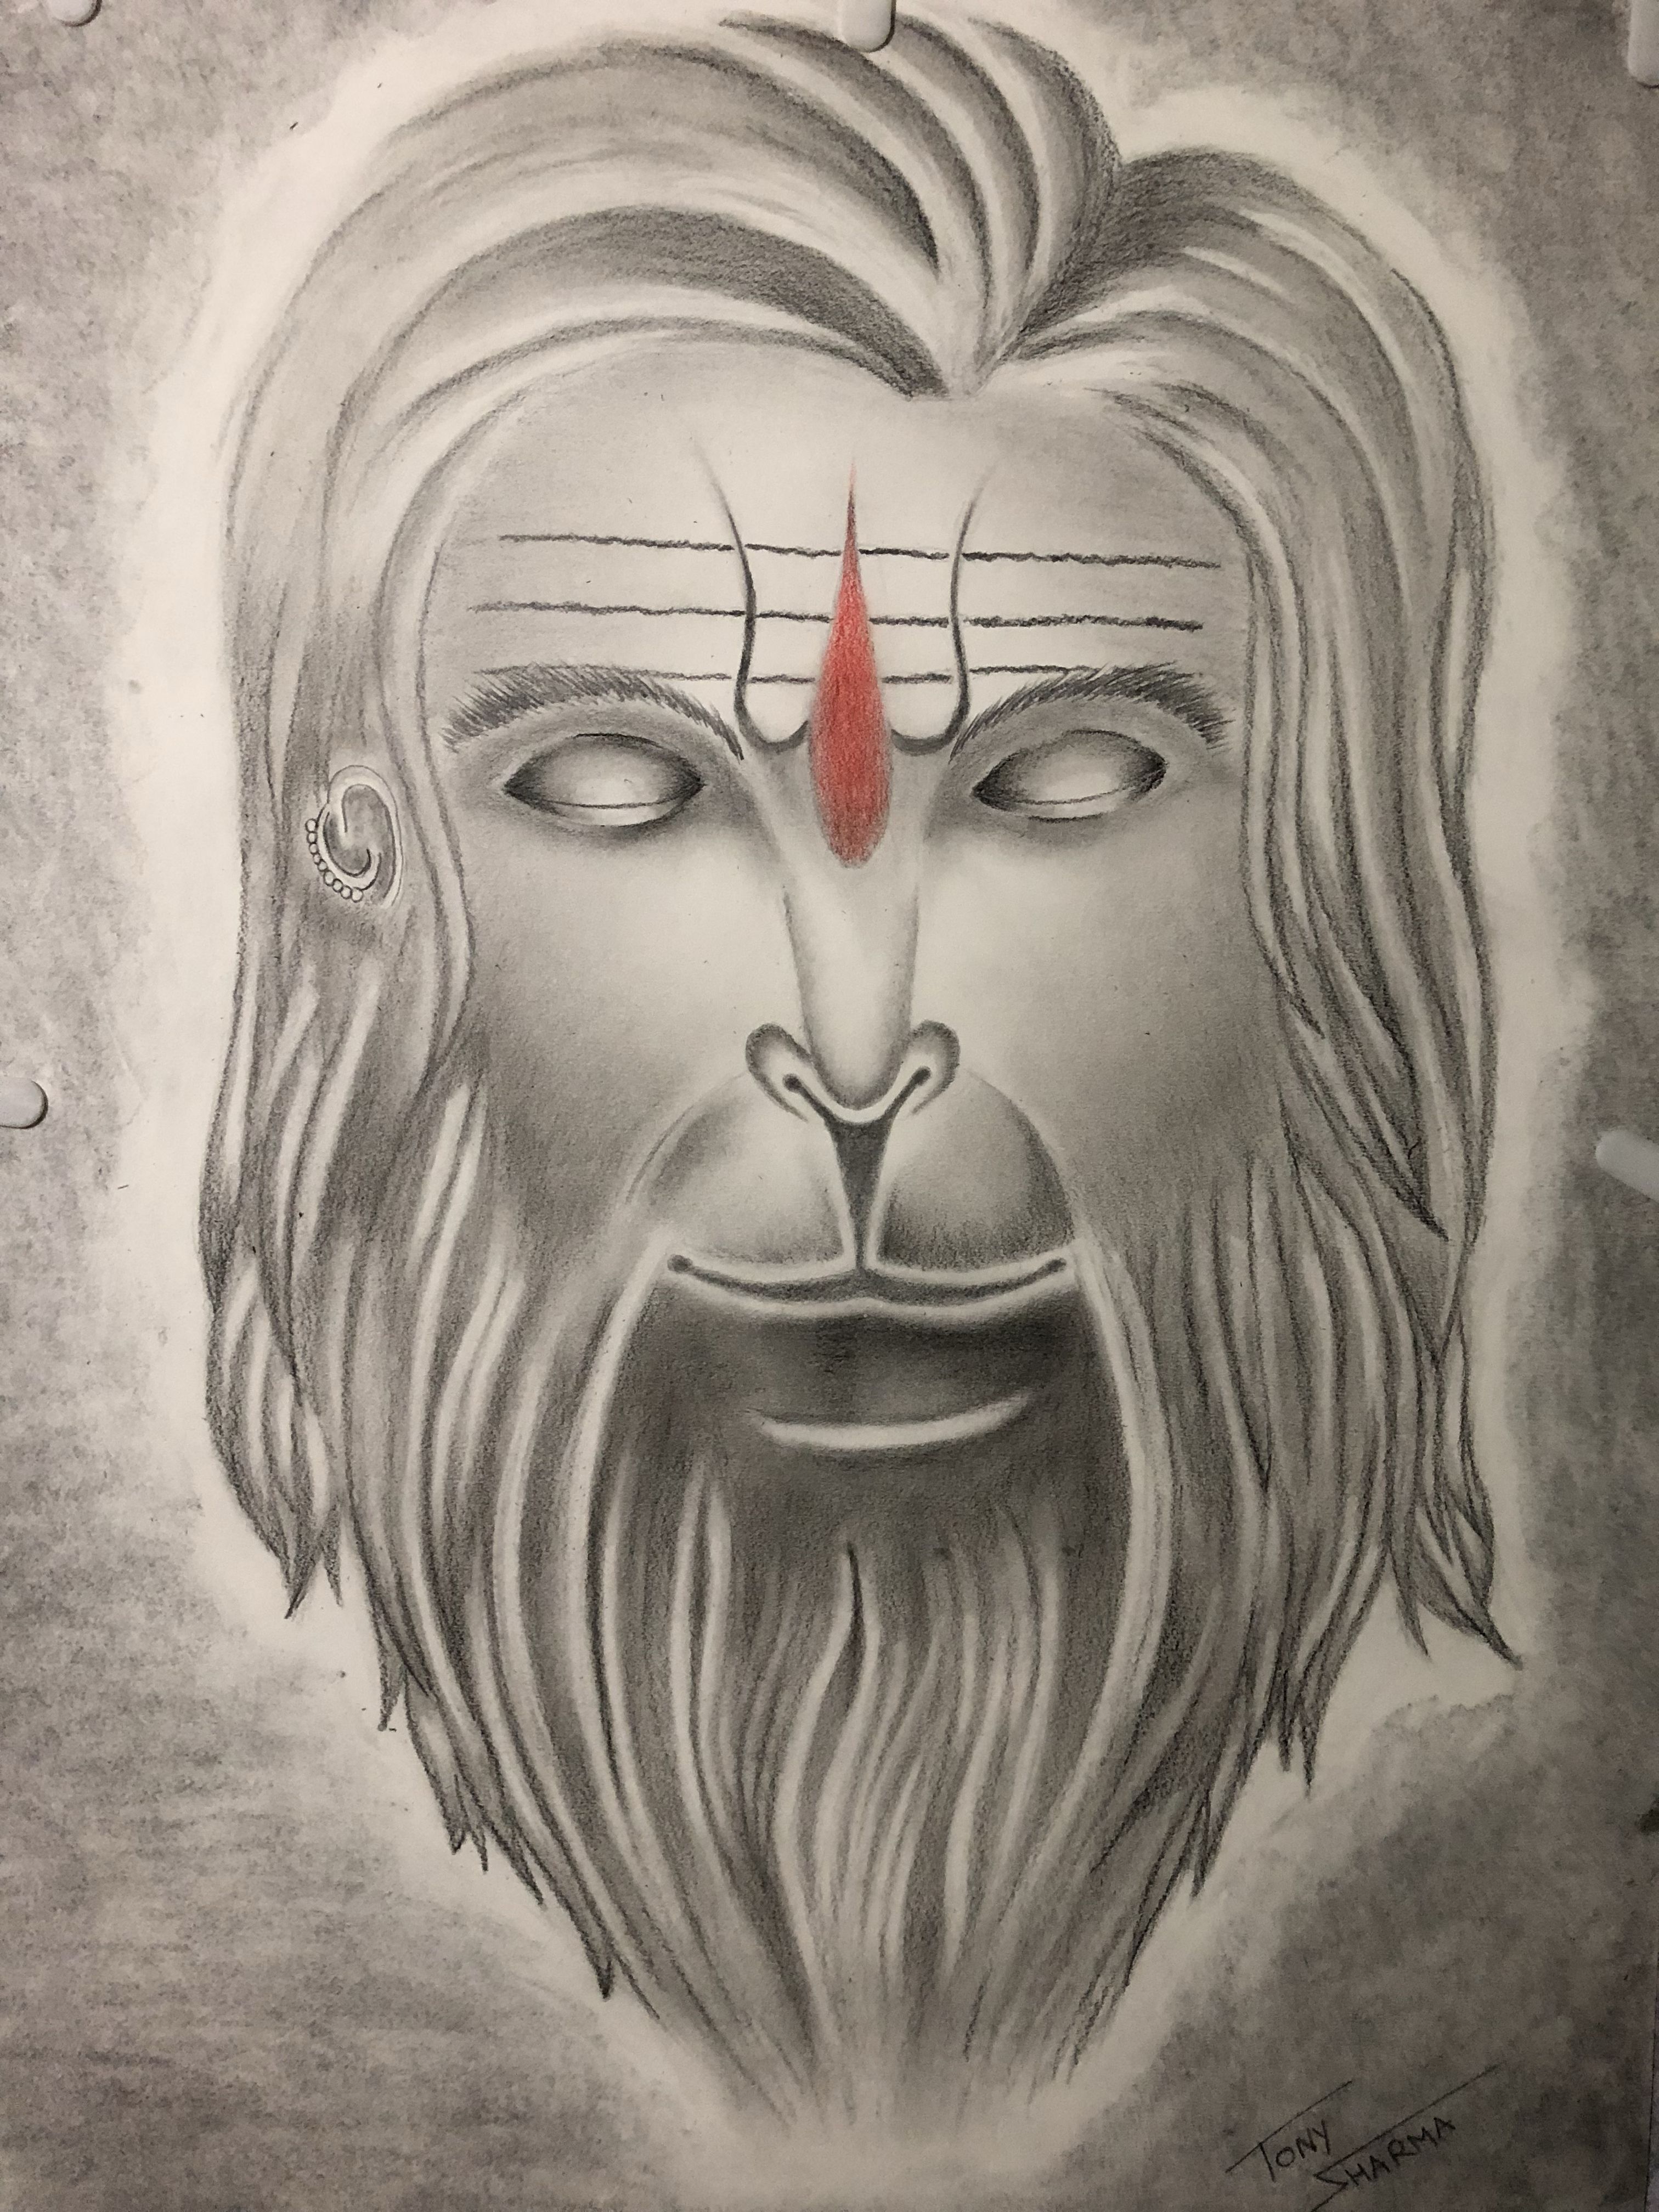 Trends For Drawing Warrior Hanuman Image. The Corvid Journal